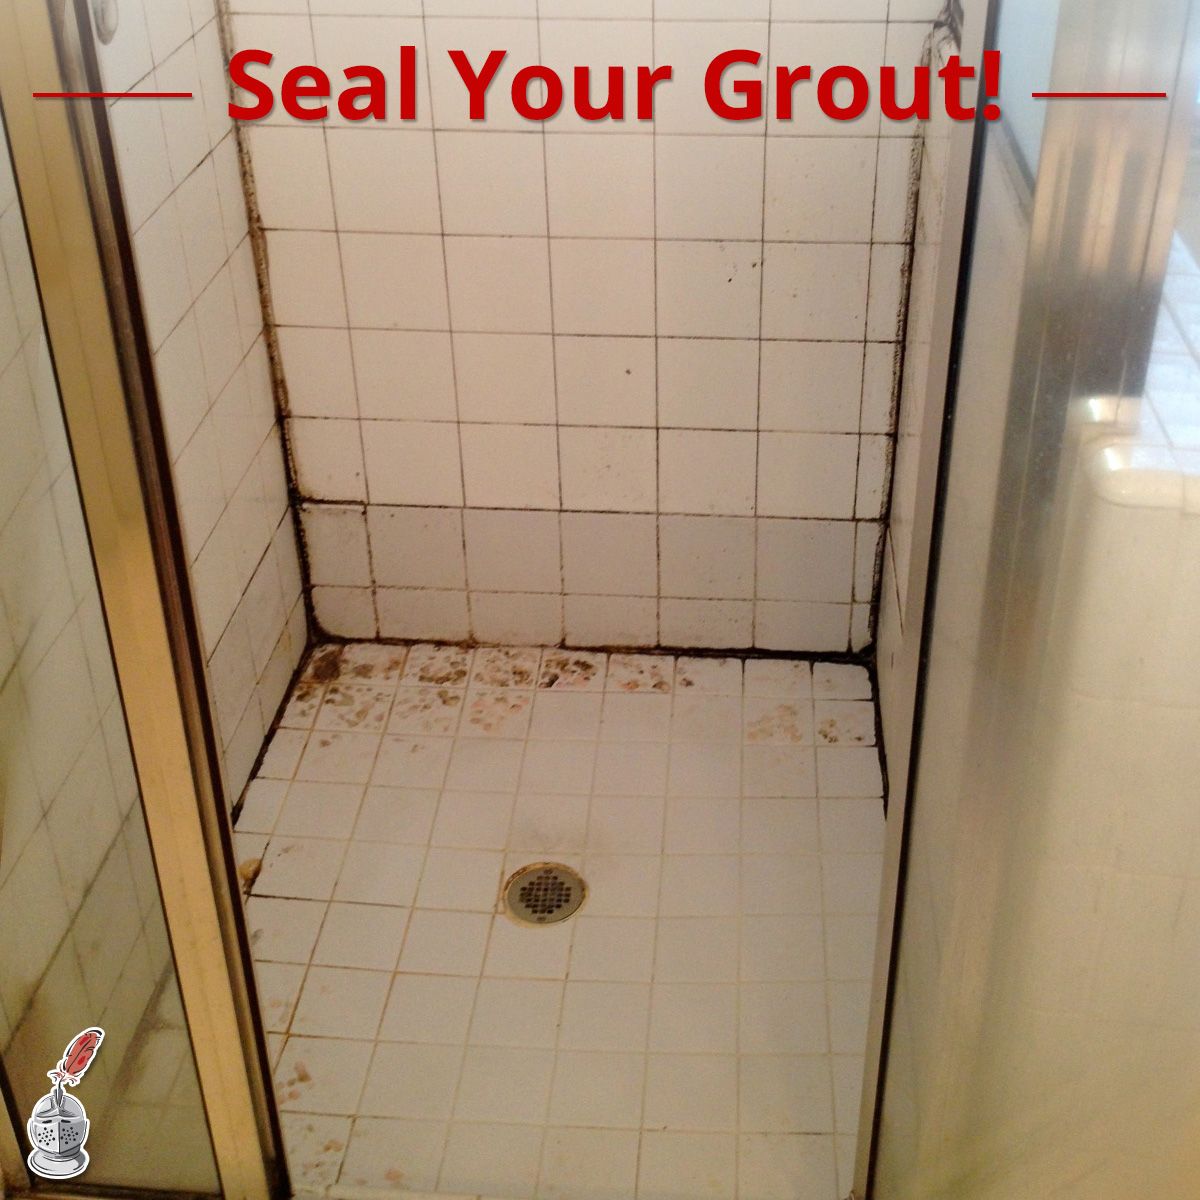 Seal Your Grout!